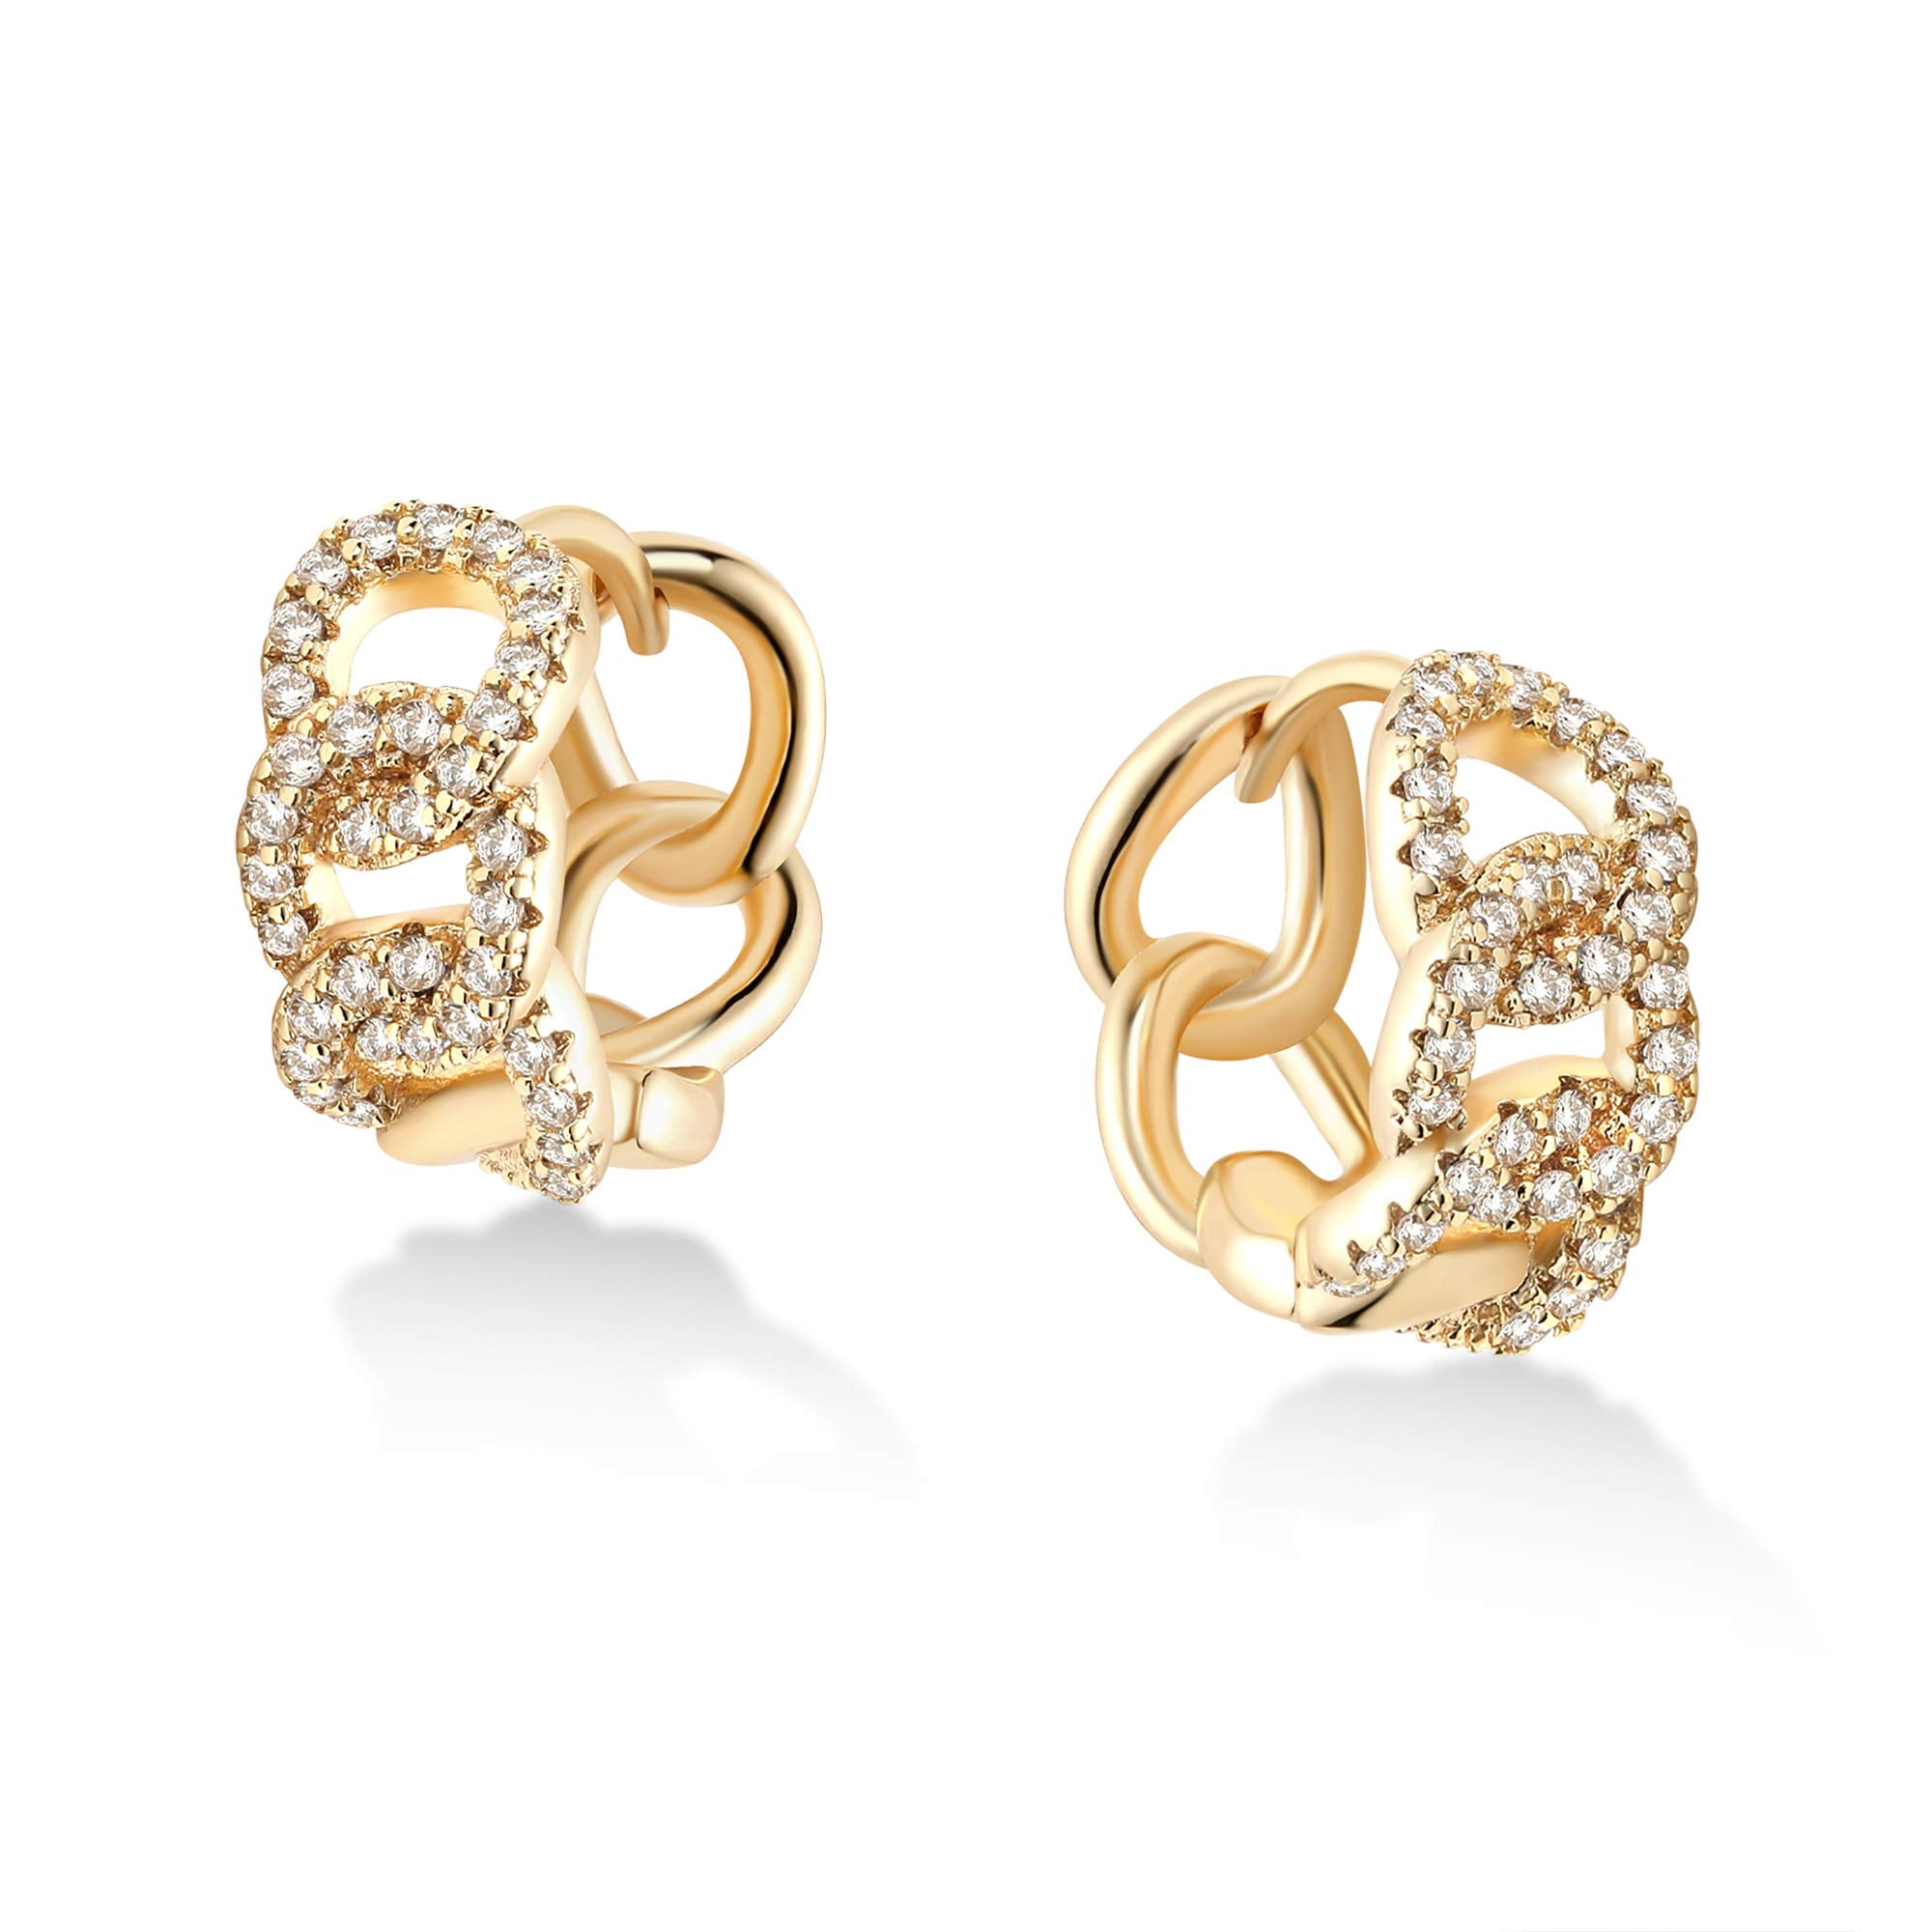 Details about   14K Gold Plated 925 Sterling Silver Iced Baguette Mens Women's Hoops Earrings 